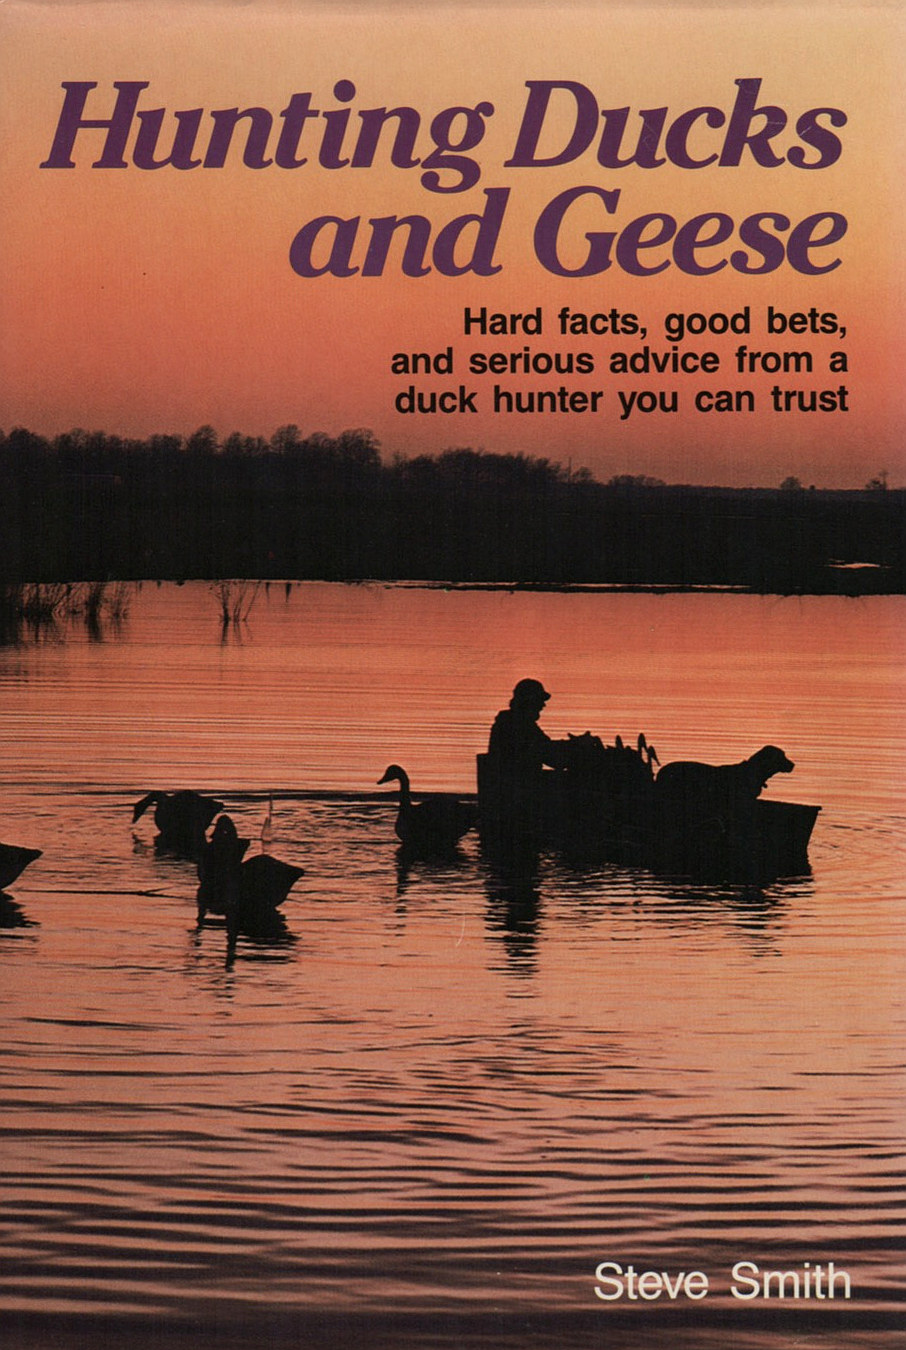 Hunting Ducks and Geese (Steve Smith)